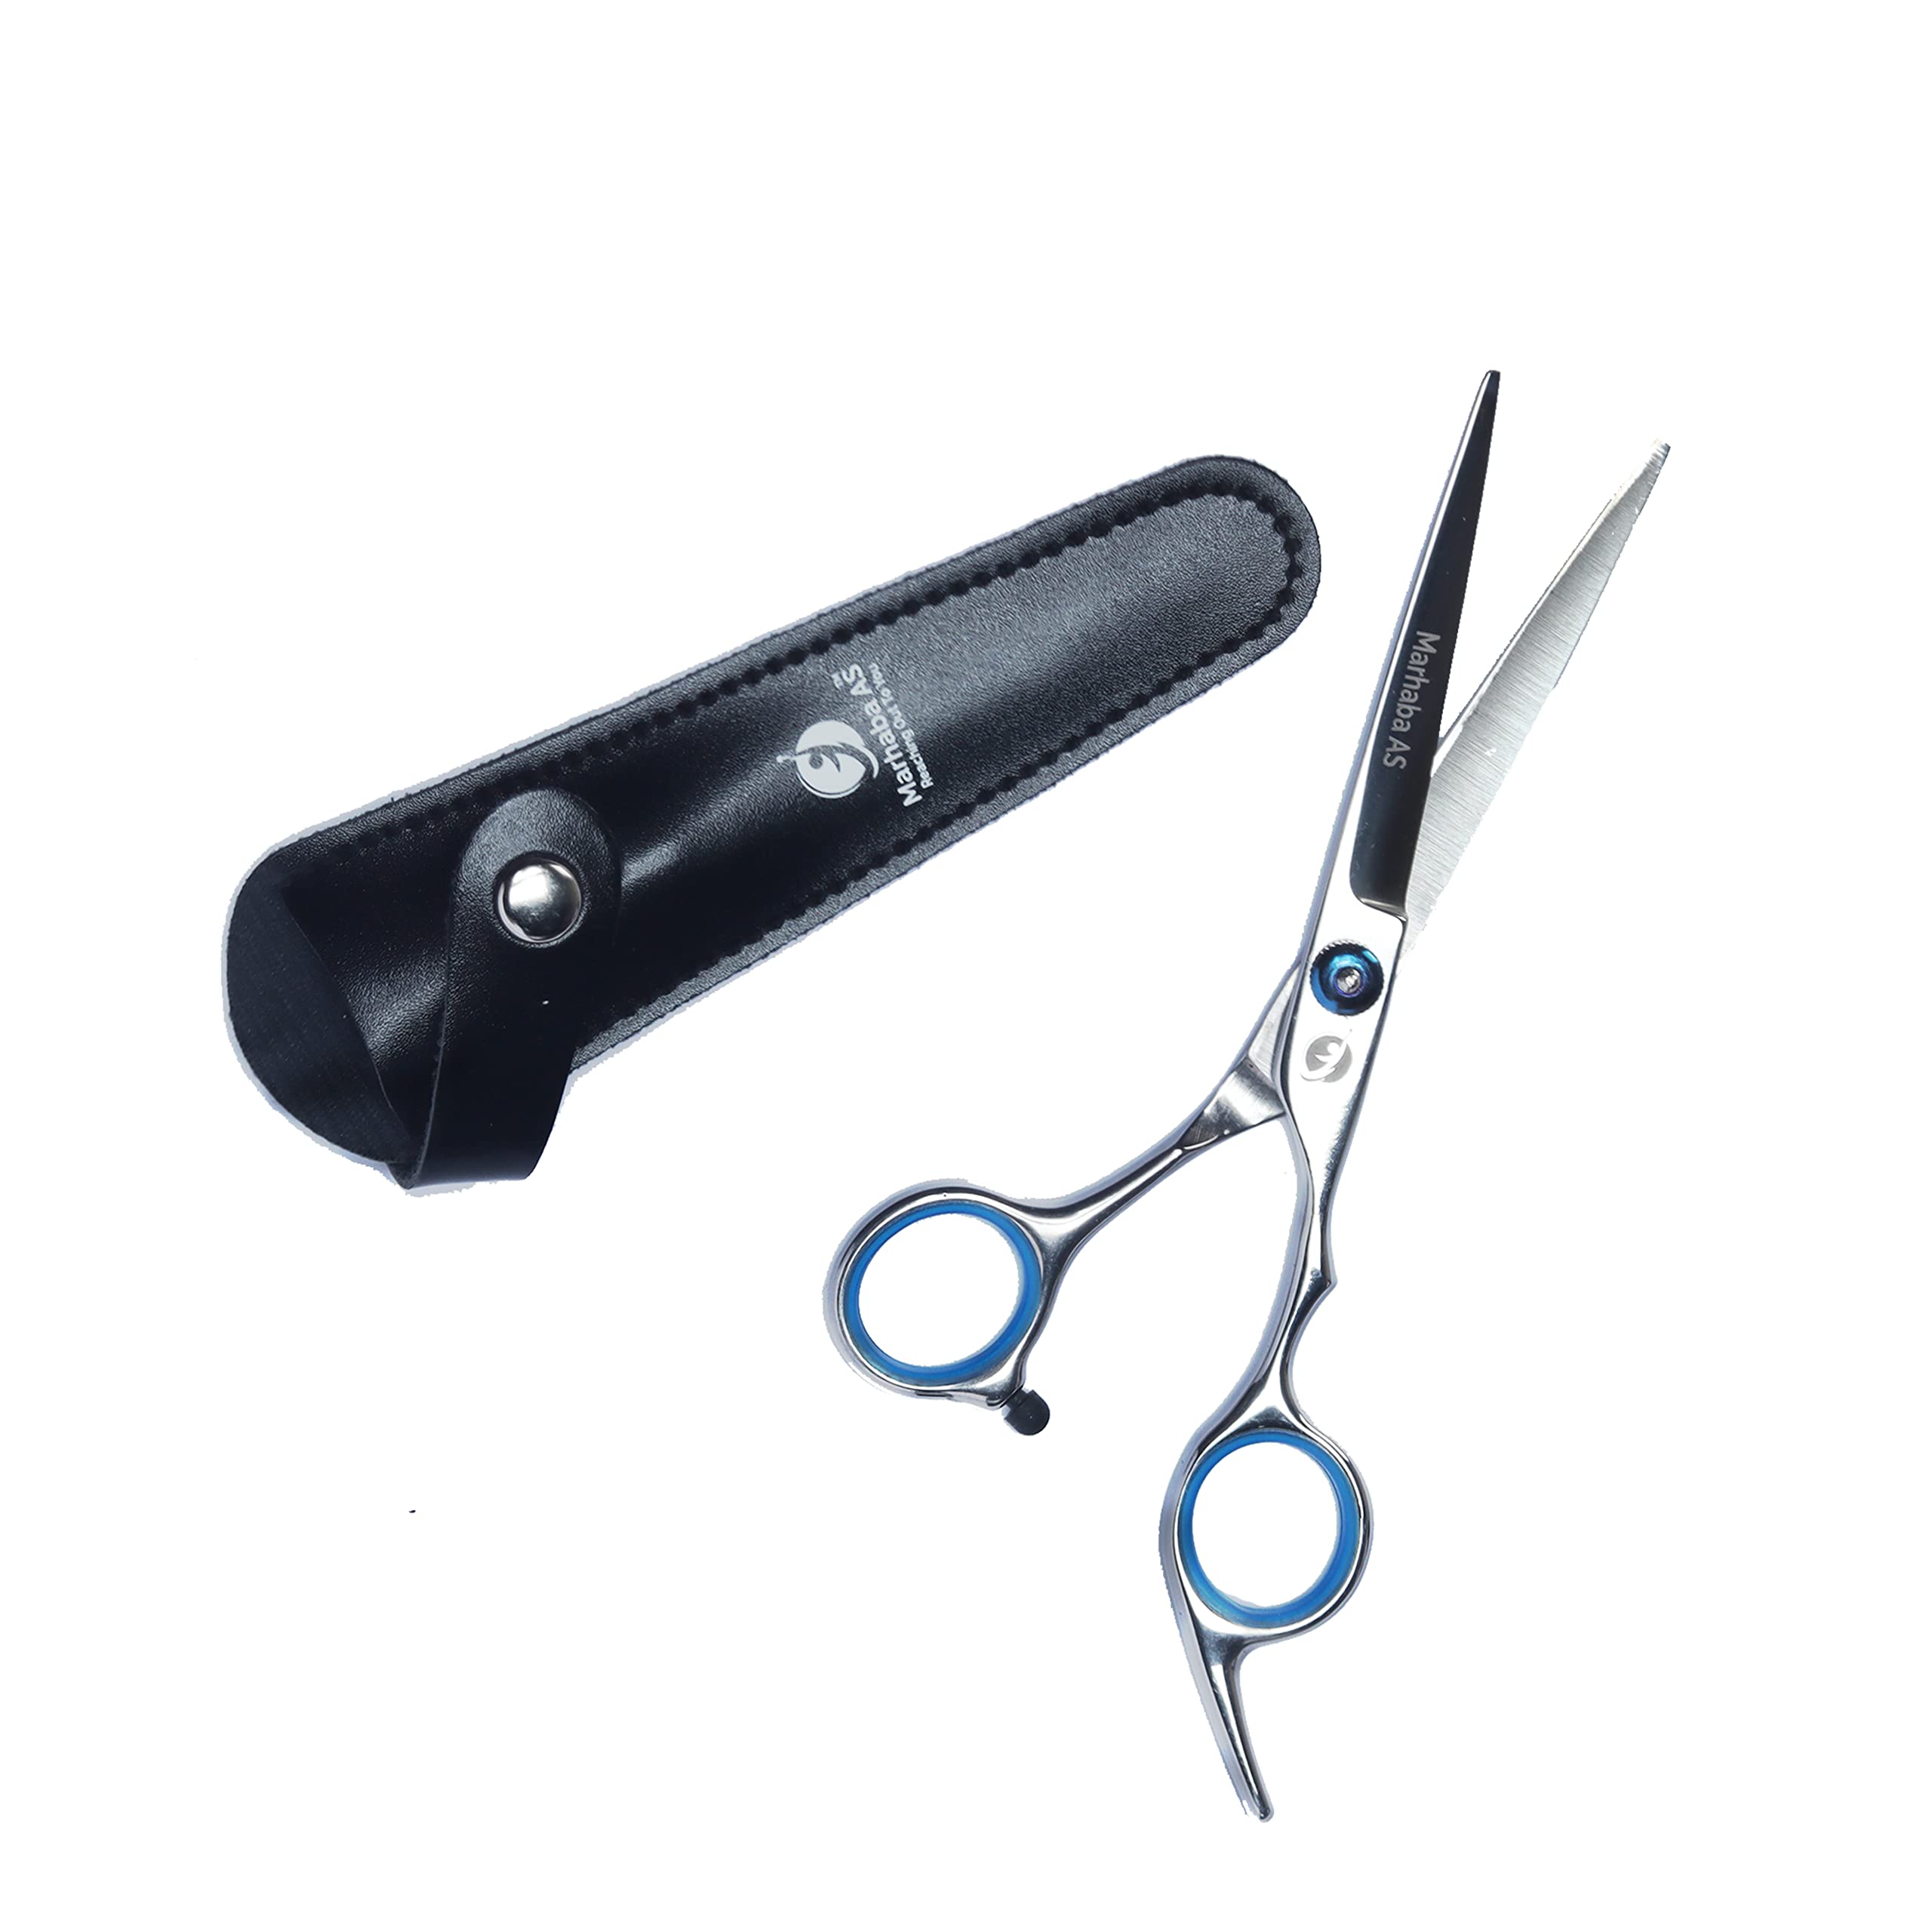 Marhaba AS Hair Cutting Scissors, Professional Barber Scissors, 2 Pcs Hair Cut Scissors set for Men and Women, Stainless Steel Hair Shears for Home and Salon Use, Scissors for Hair with Leather Case…